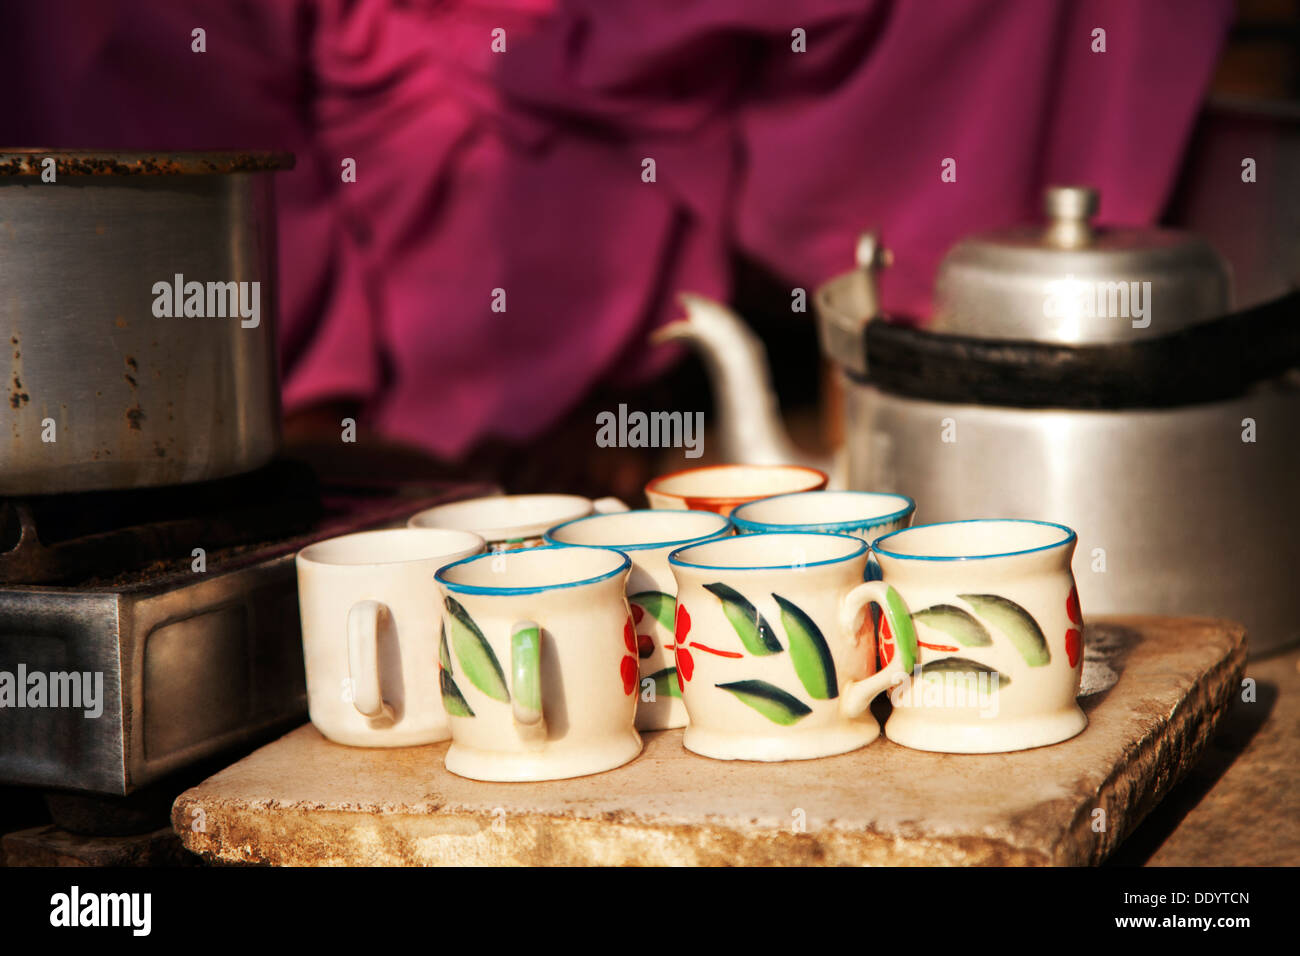 https://c8.alamy.com/comp/DDYTCN/tea-cups-pan-on-stove-and-kettle-at-street-market-stall-DDYTCN.jpg